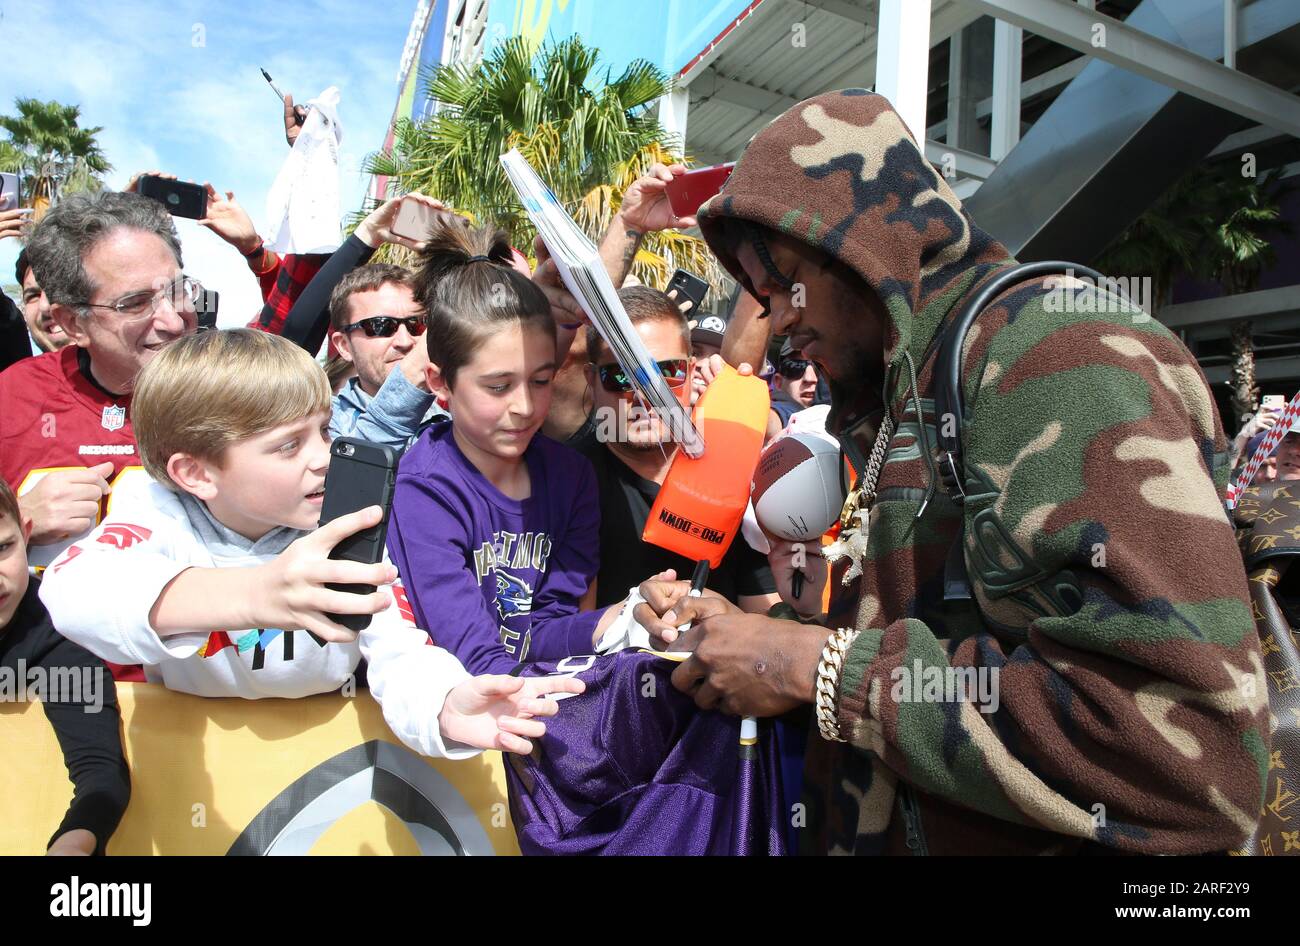 Long lines at Pro Bowl to get Jackson's autograph, picture